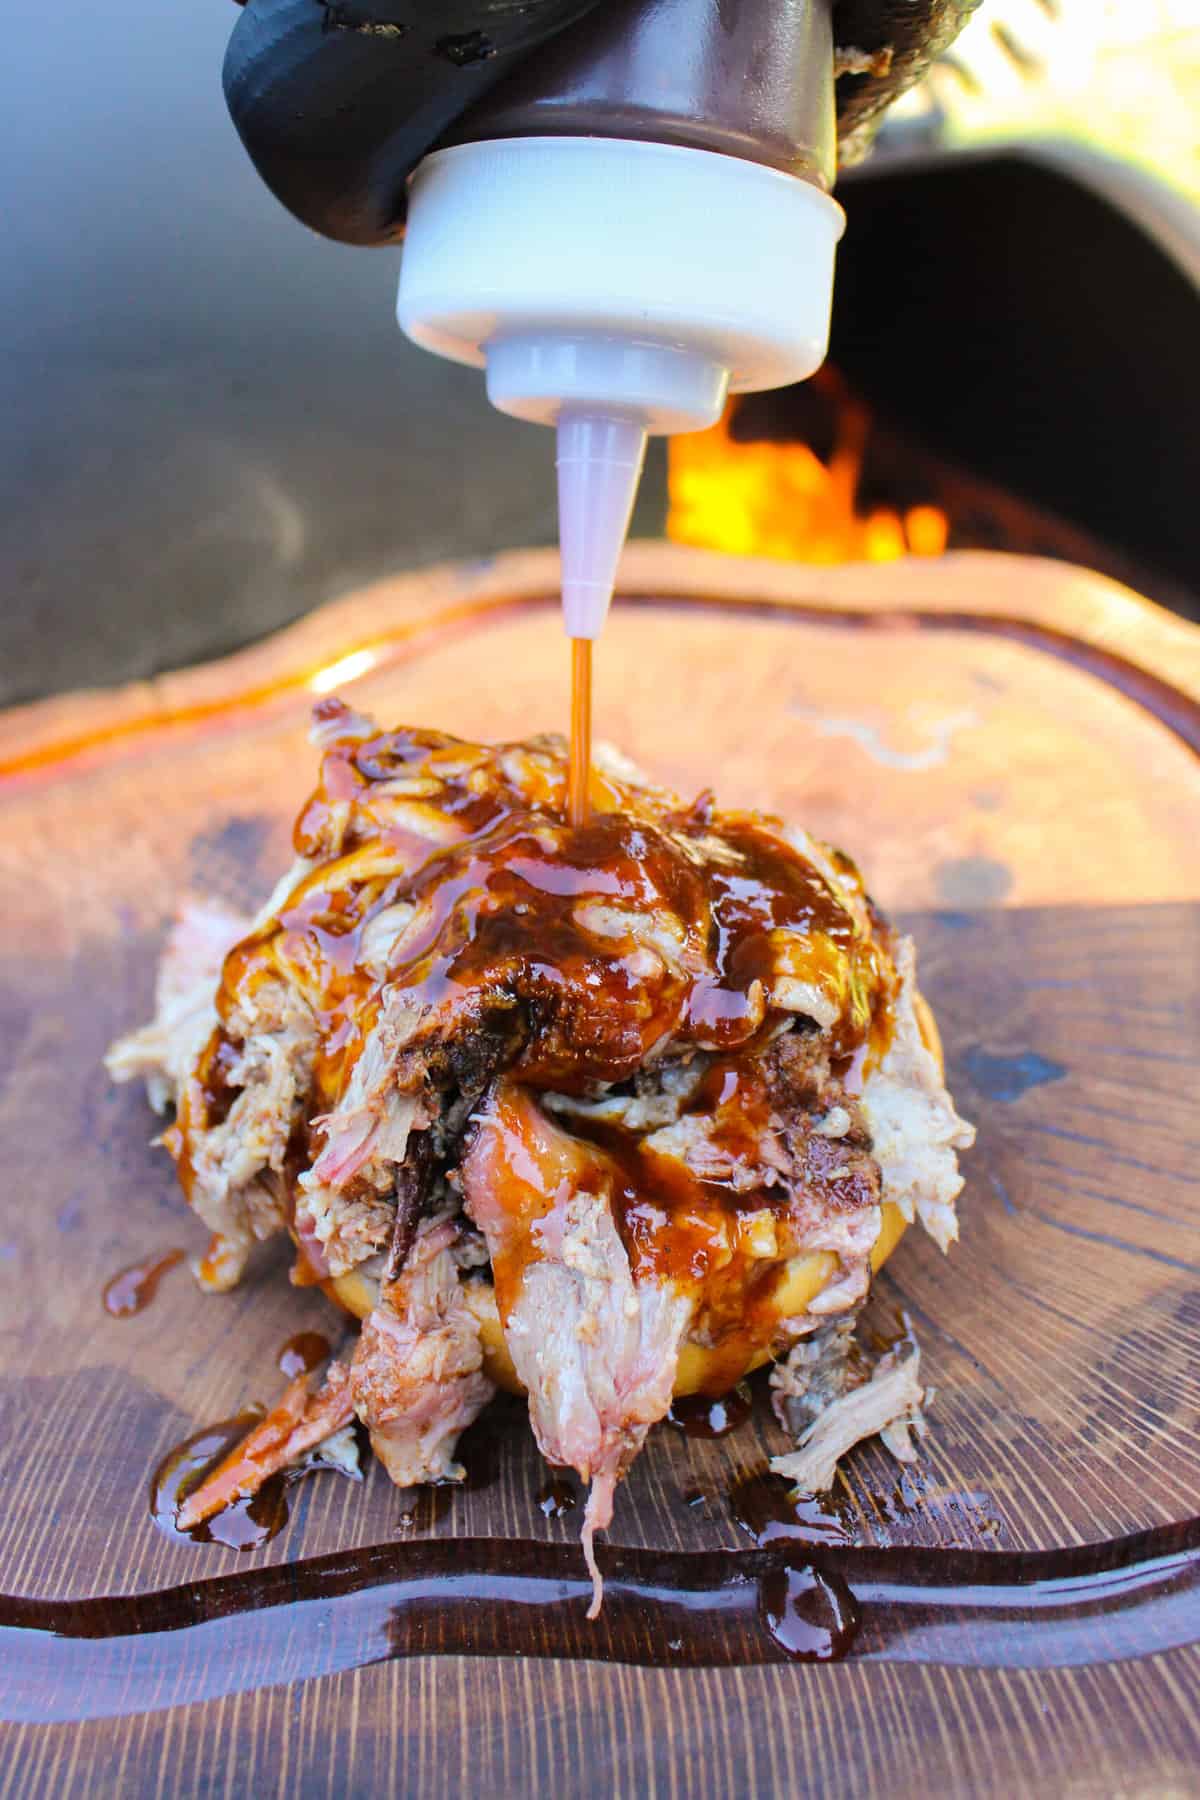 chipotle bbq sauce being drizzled over a pulled pork sandwich